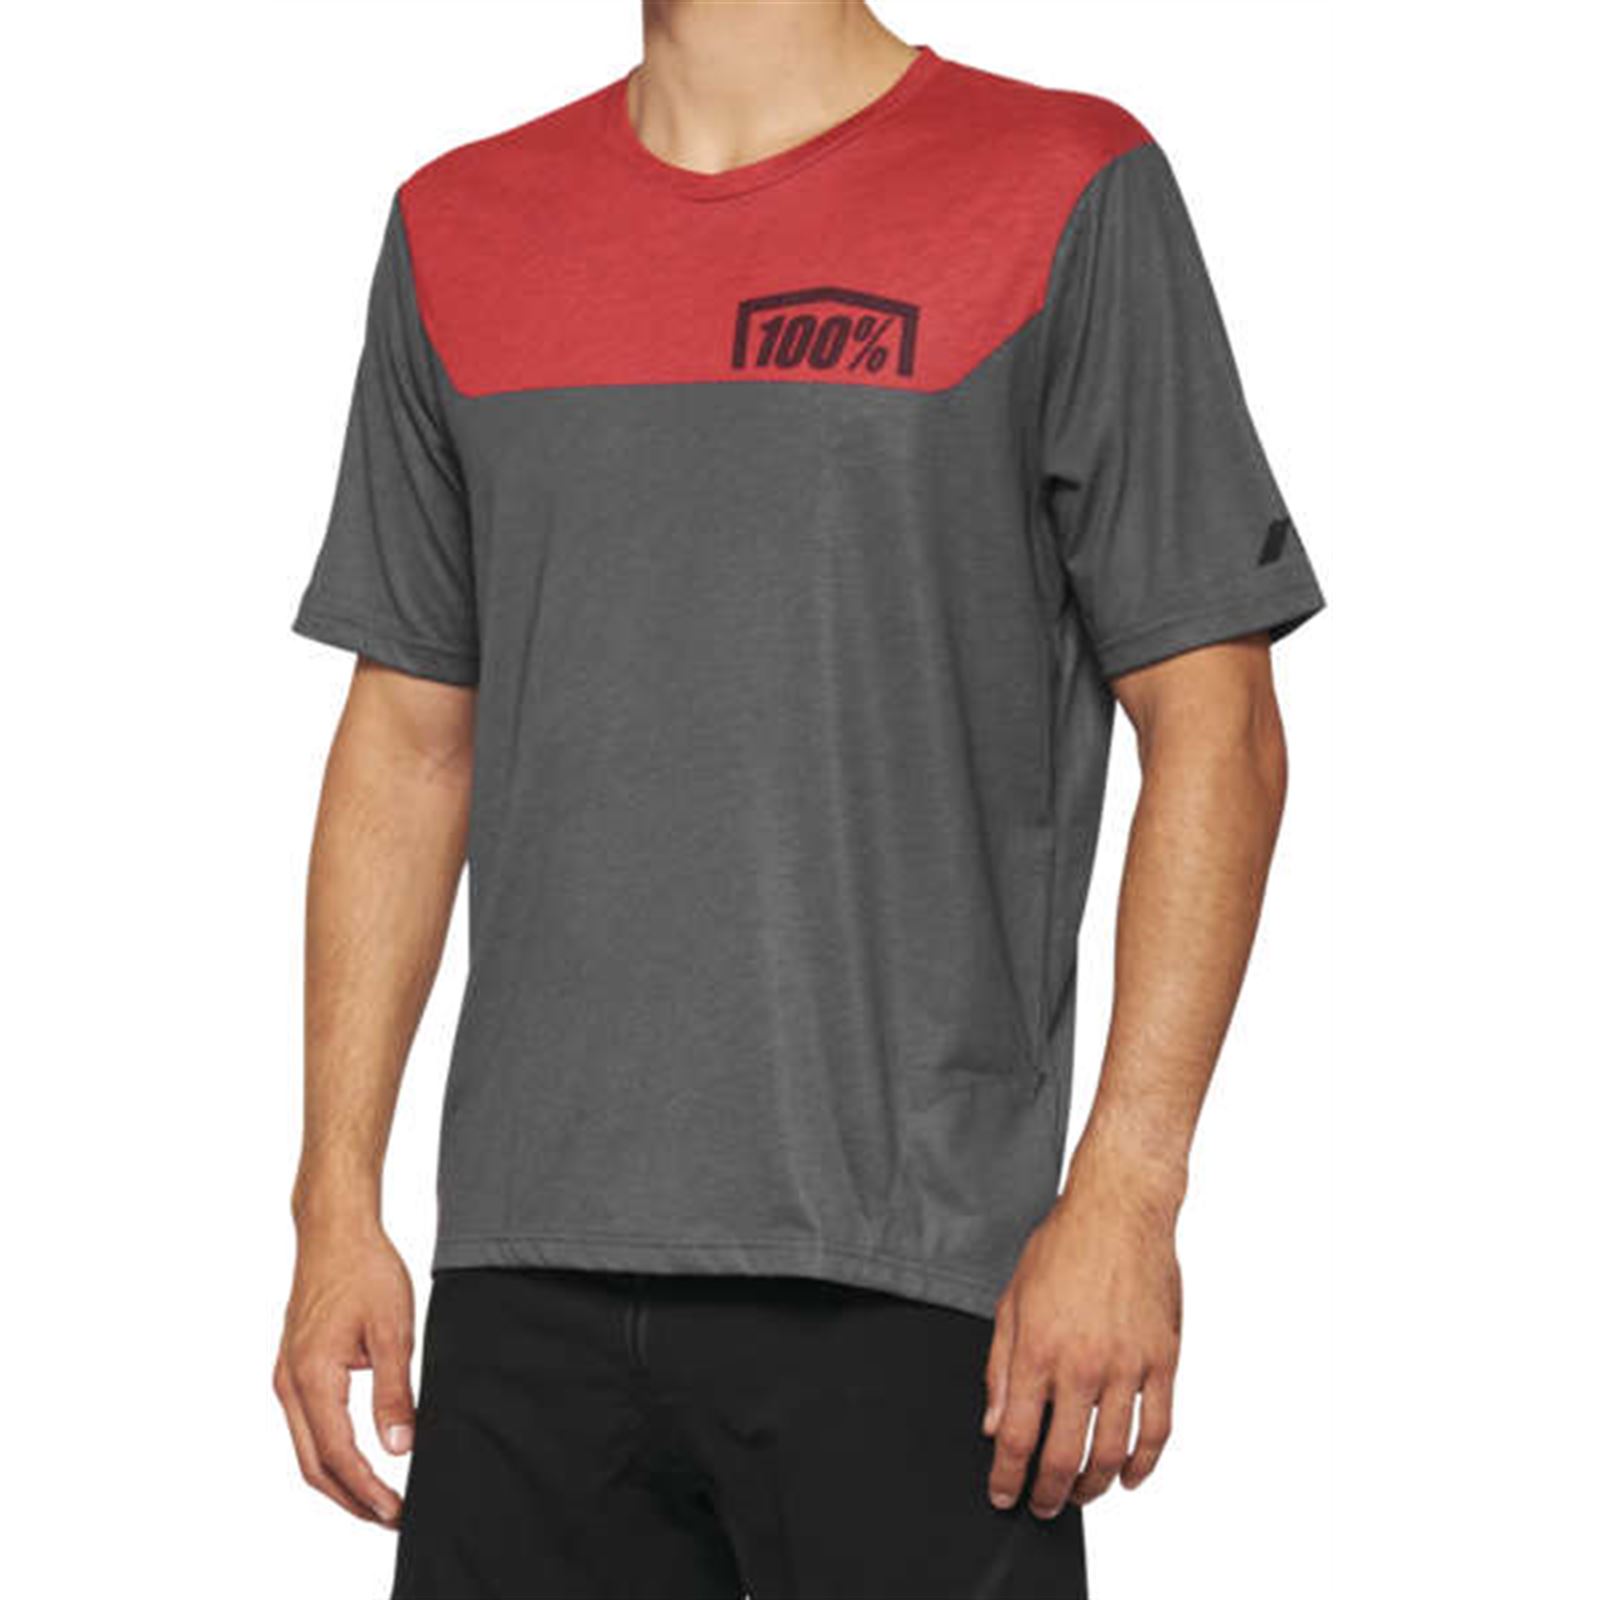 100% Men's Airmatic Jersey Charcoal/Red, Small